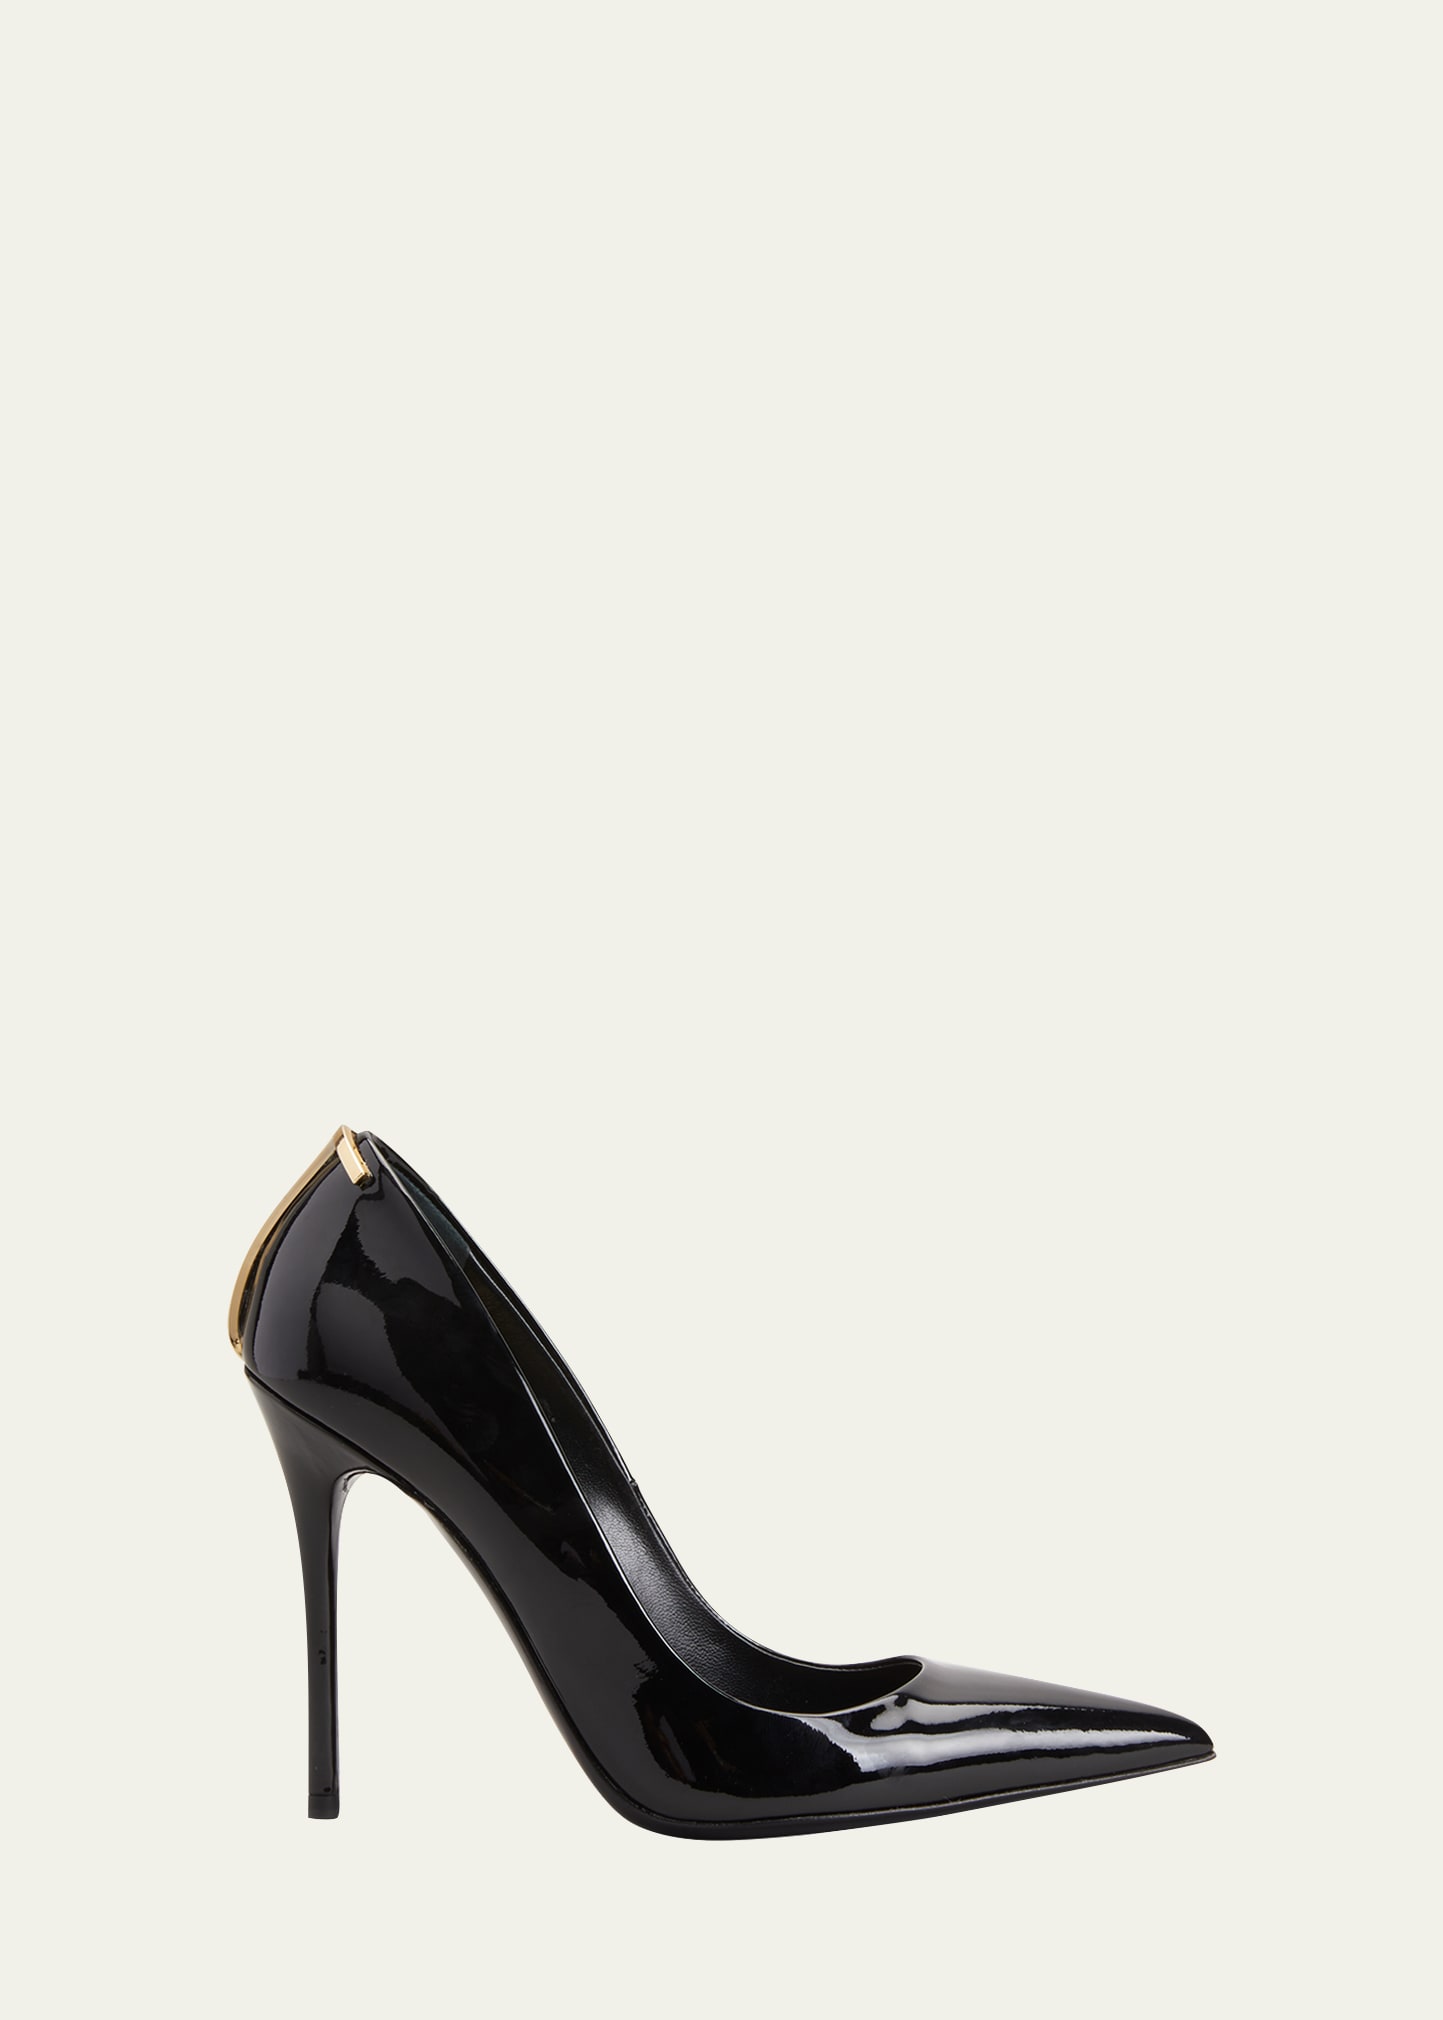 TOM FORD Iconic T Medallion Patent Pumps